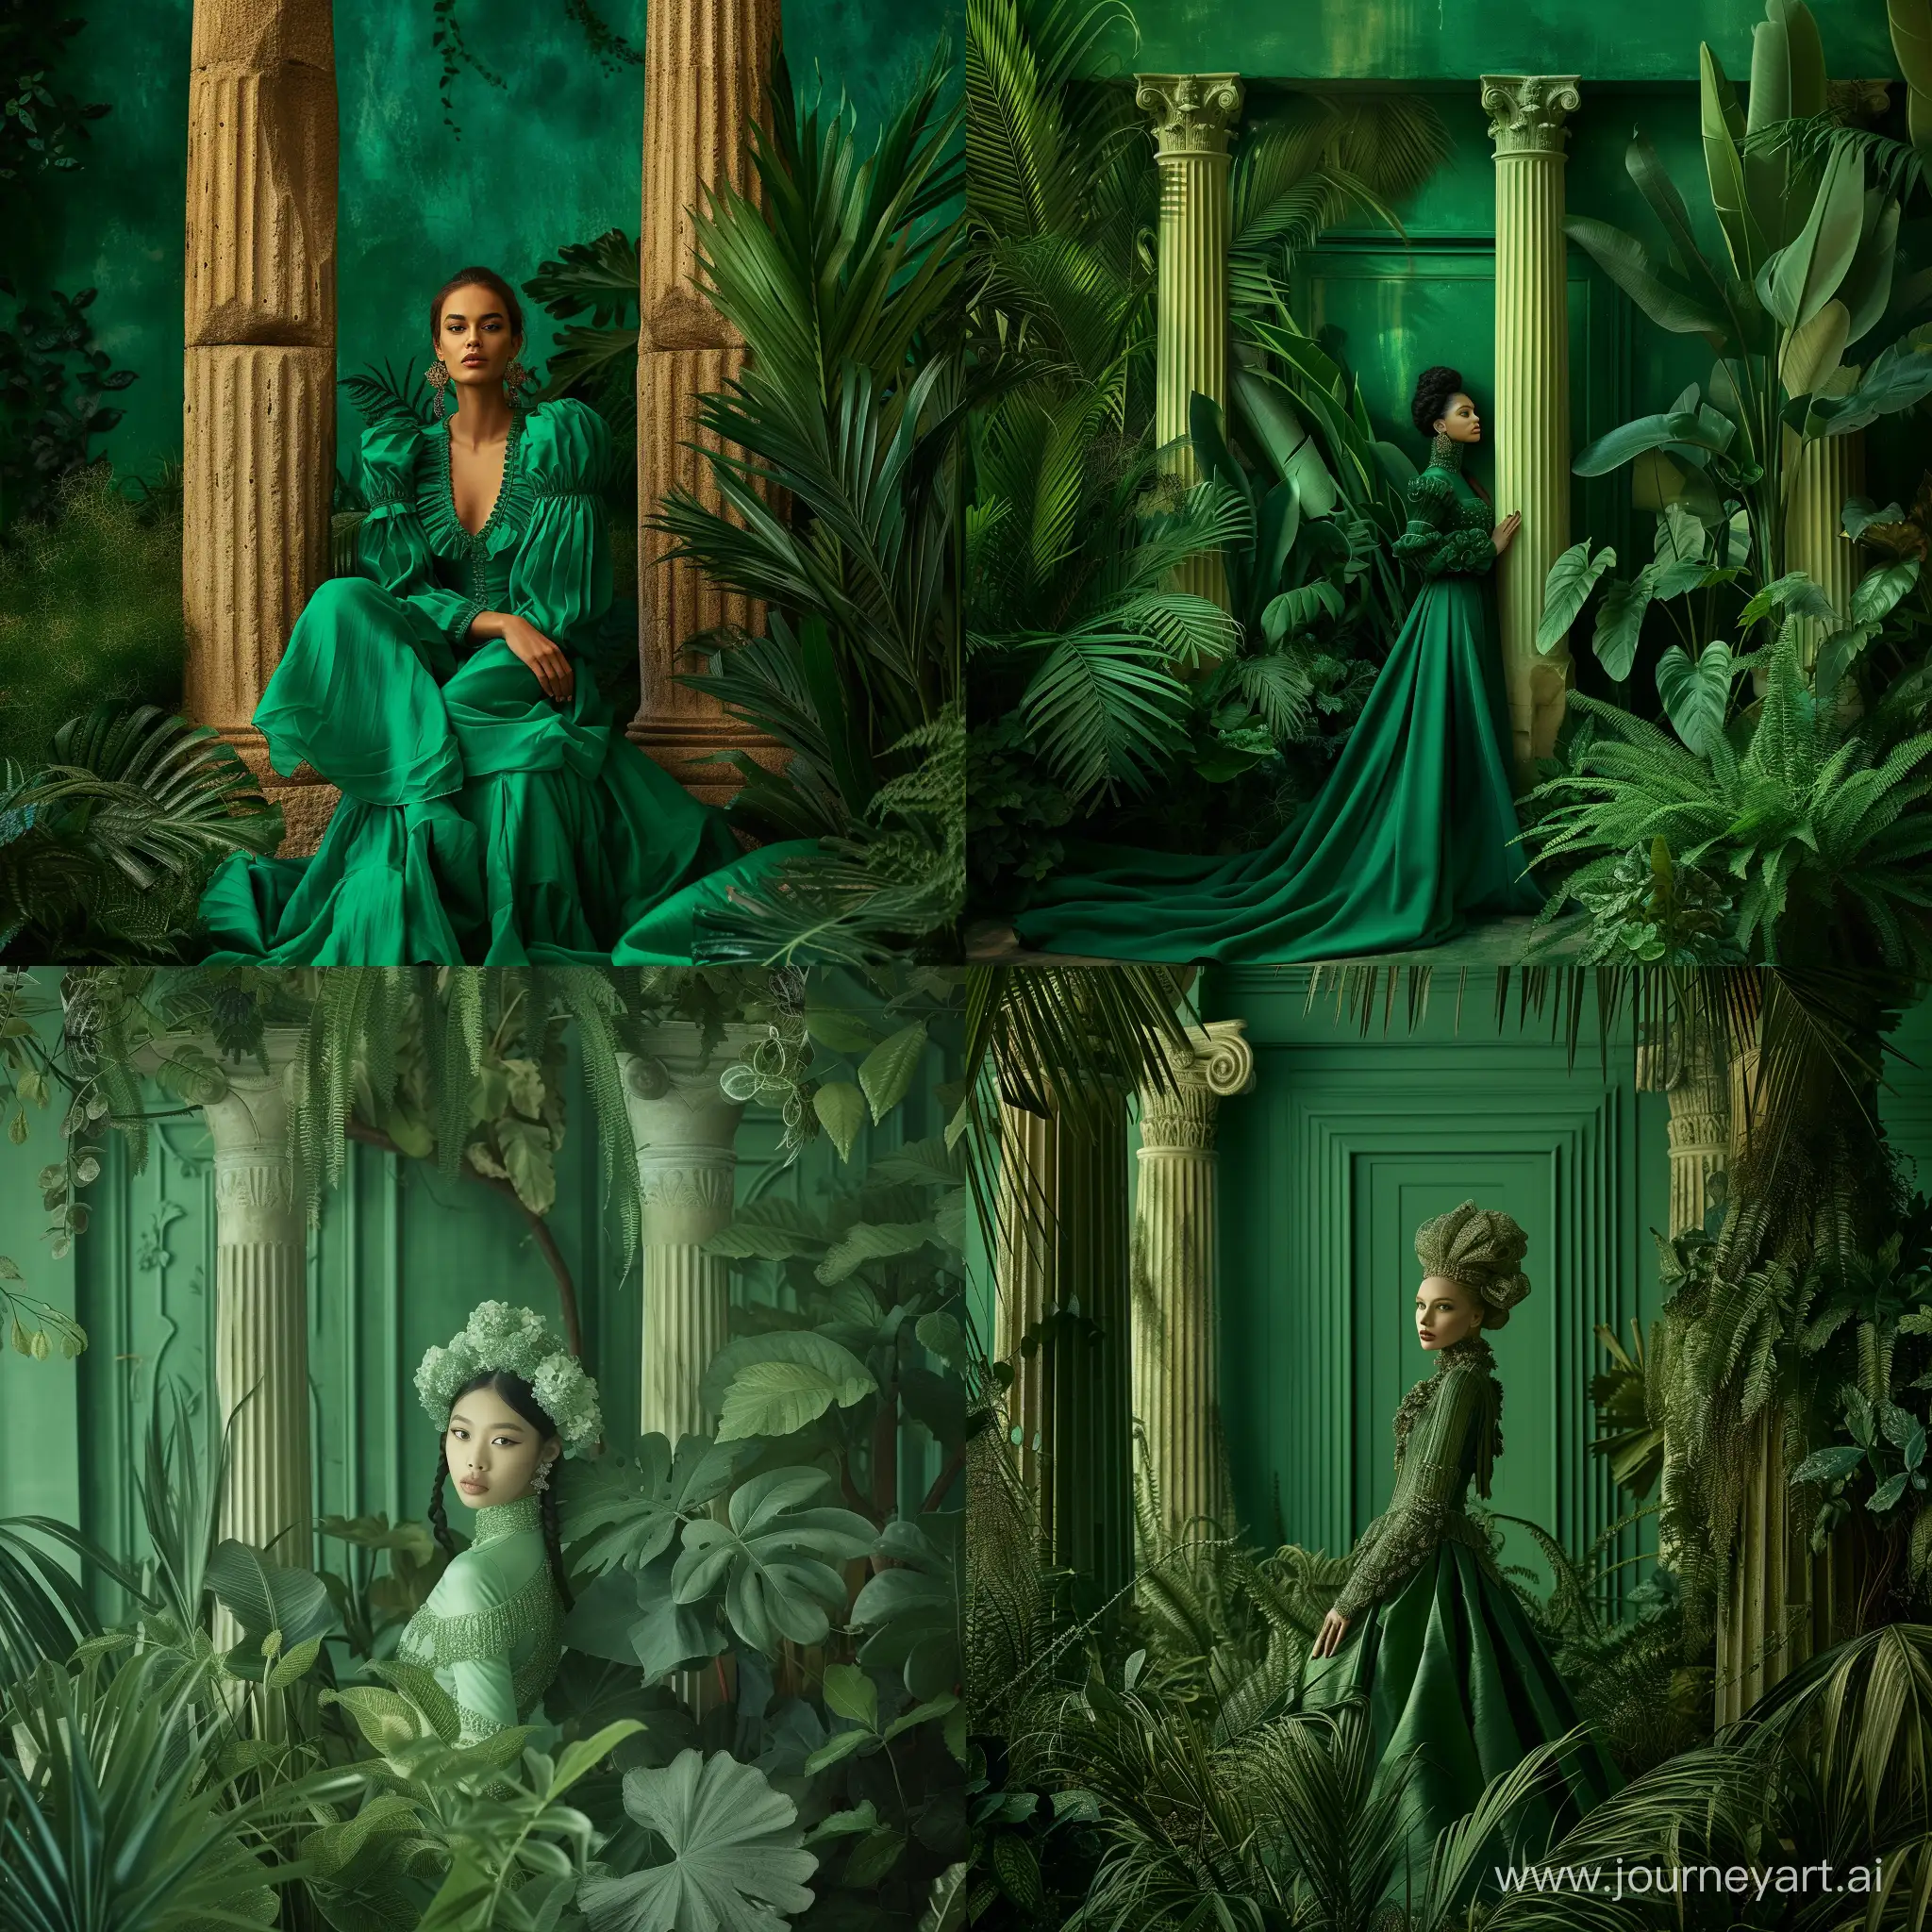 Enchanting High Fashion woman Among Exotic Plants and Ancient Columns with the color green dominating the picture